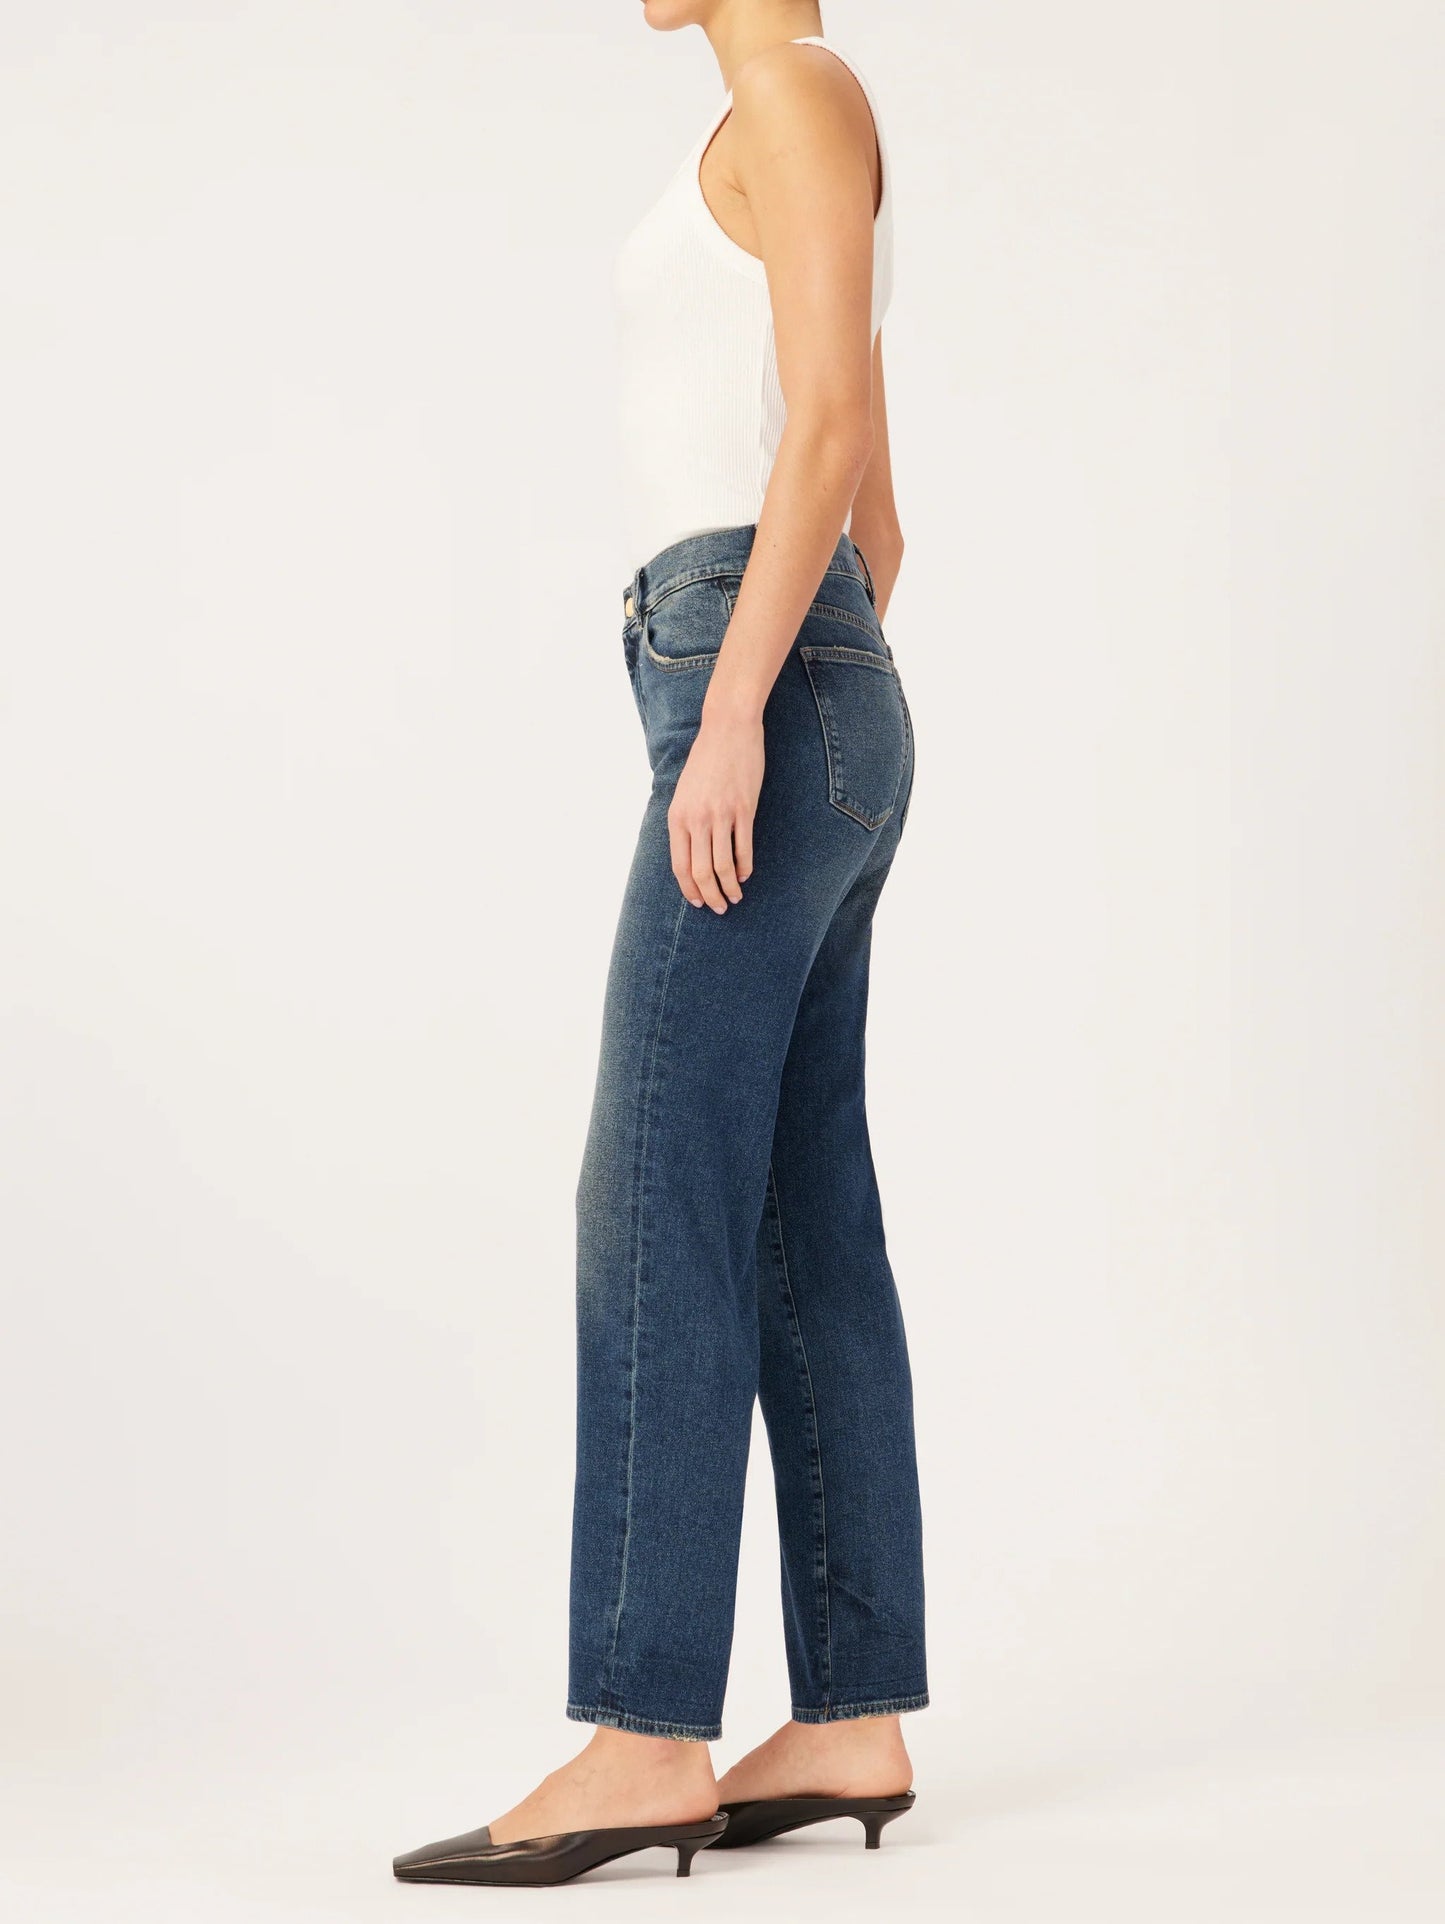 DL1961 - Jeans "Patti Striaght" taille Haute - Fisher